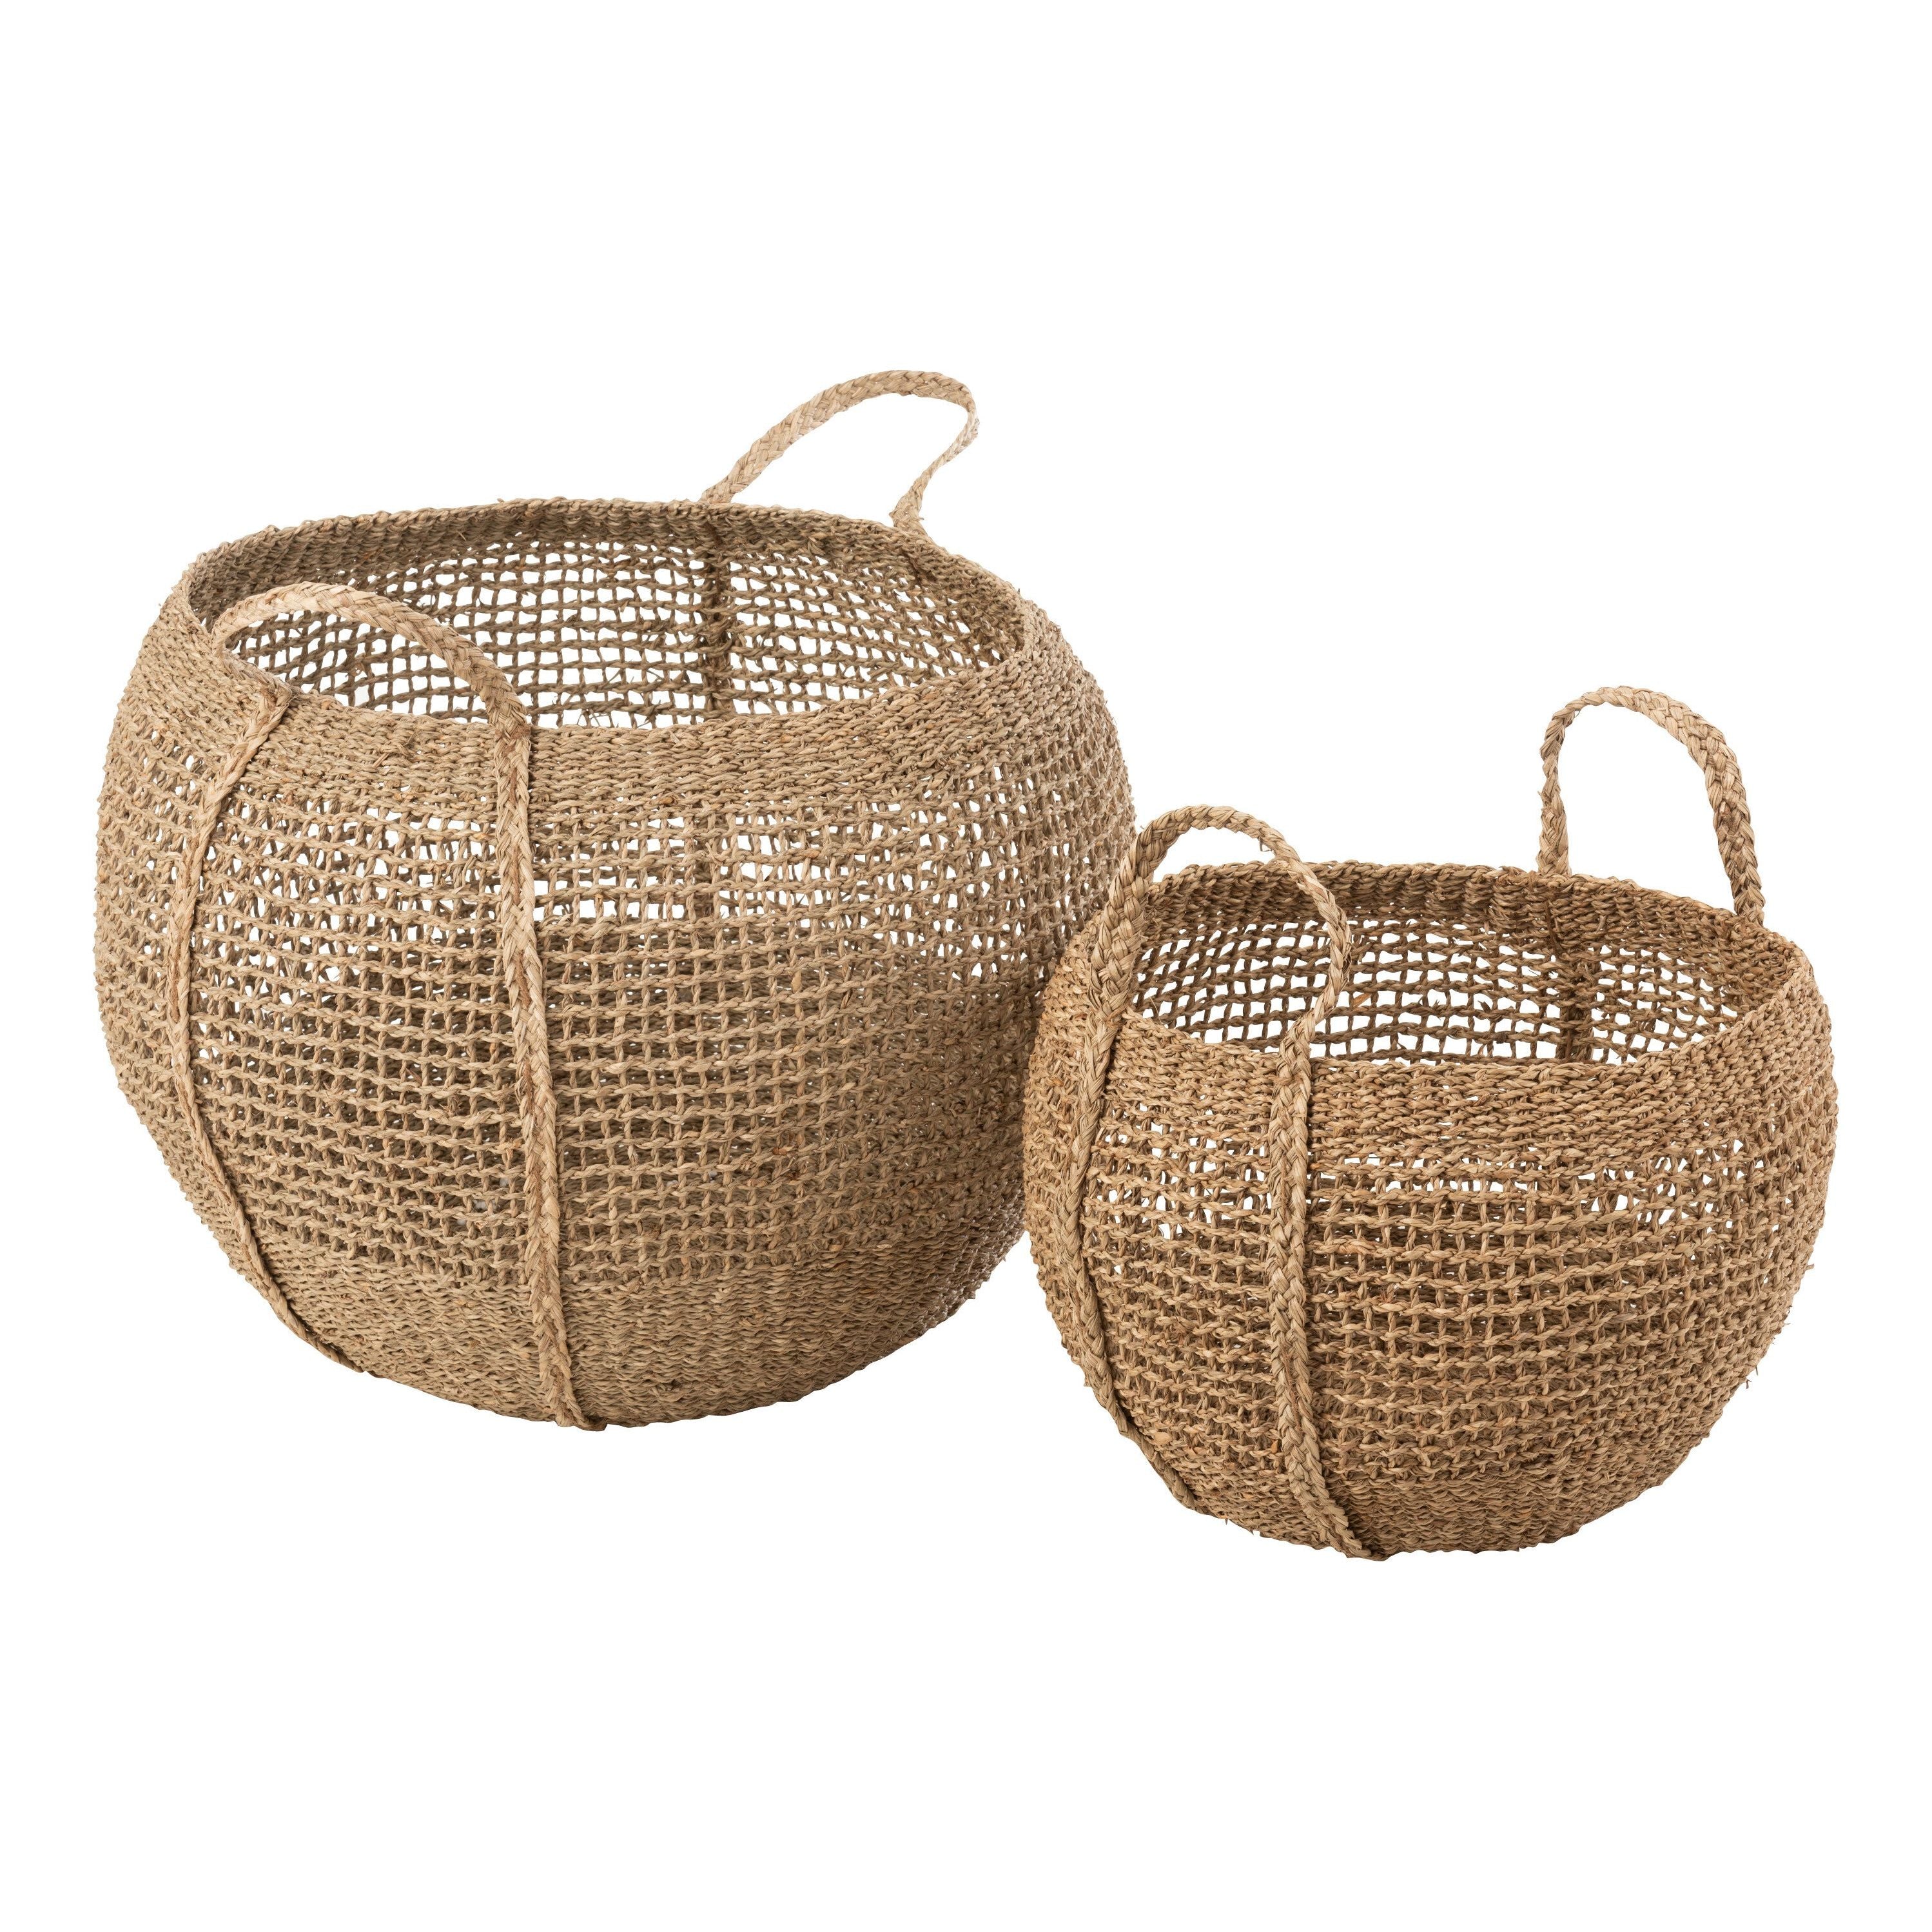 Baskets Tosai Seagrass Natural